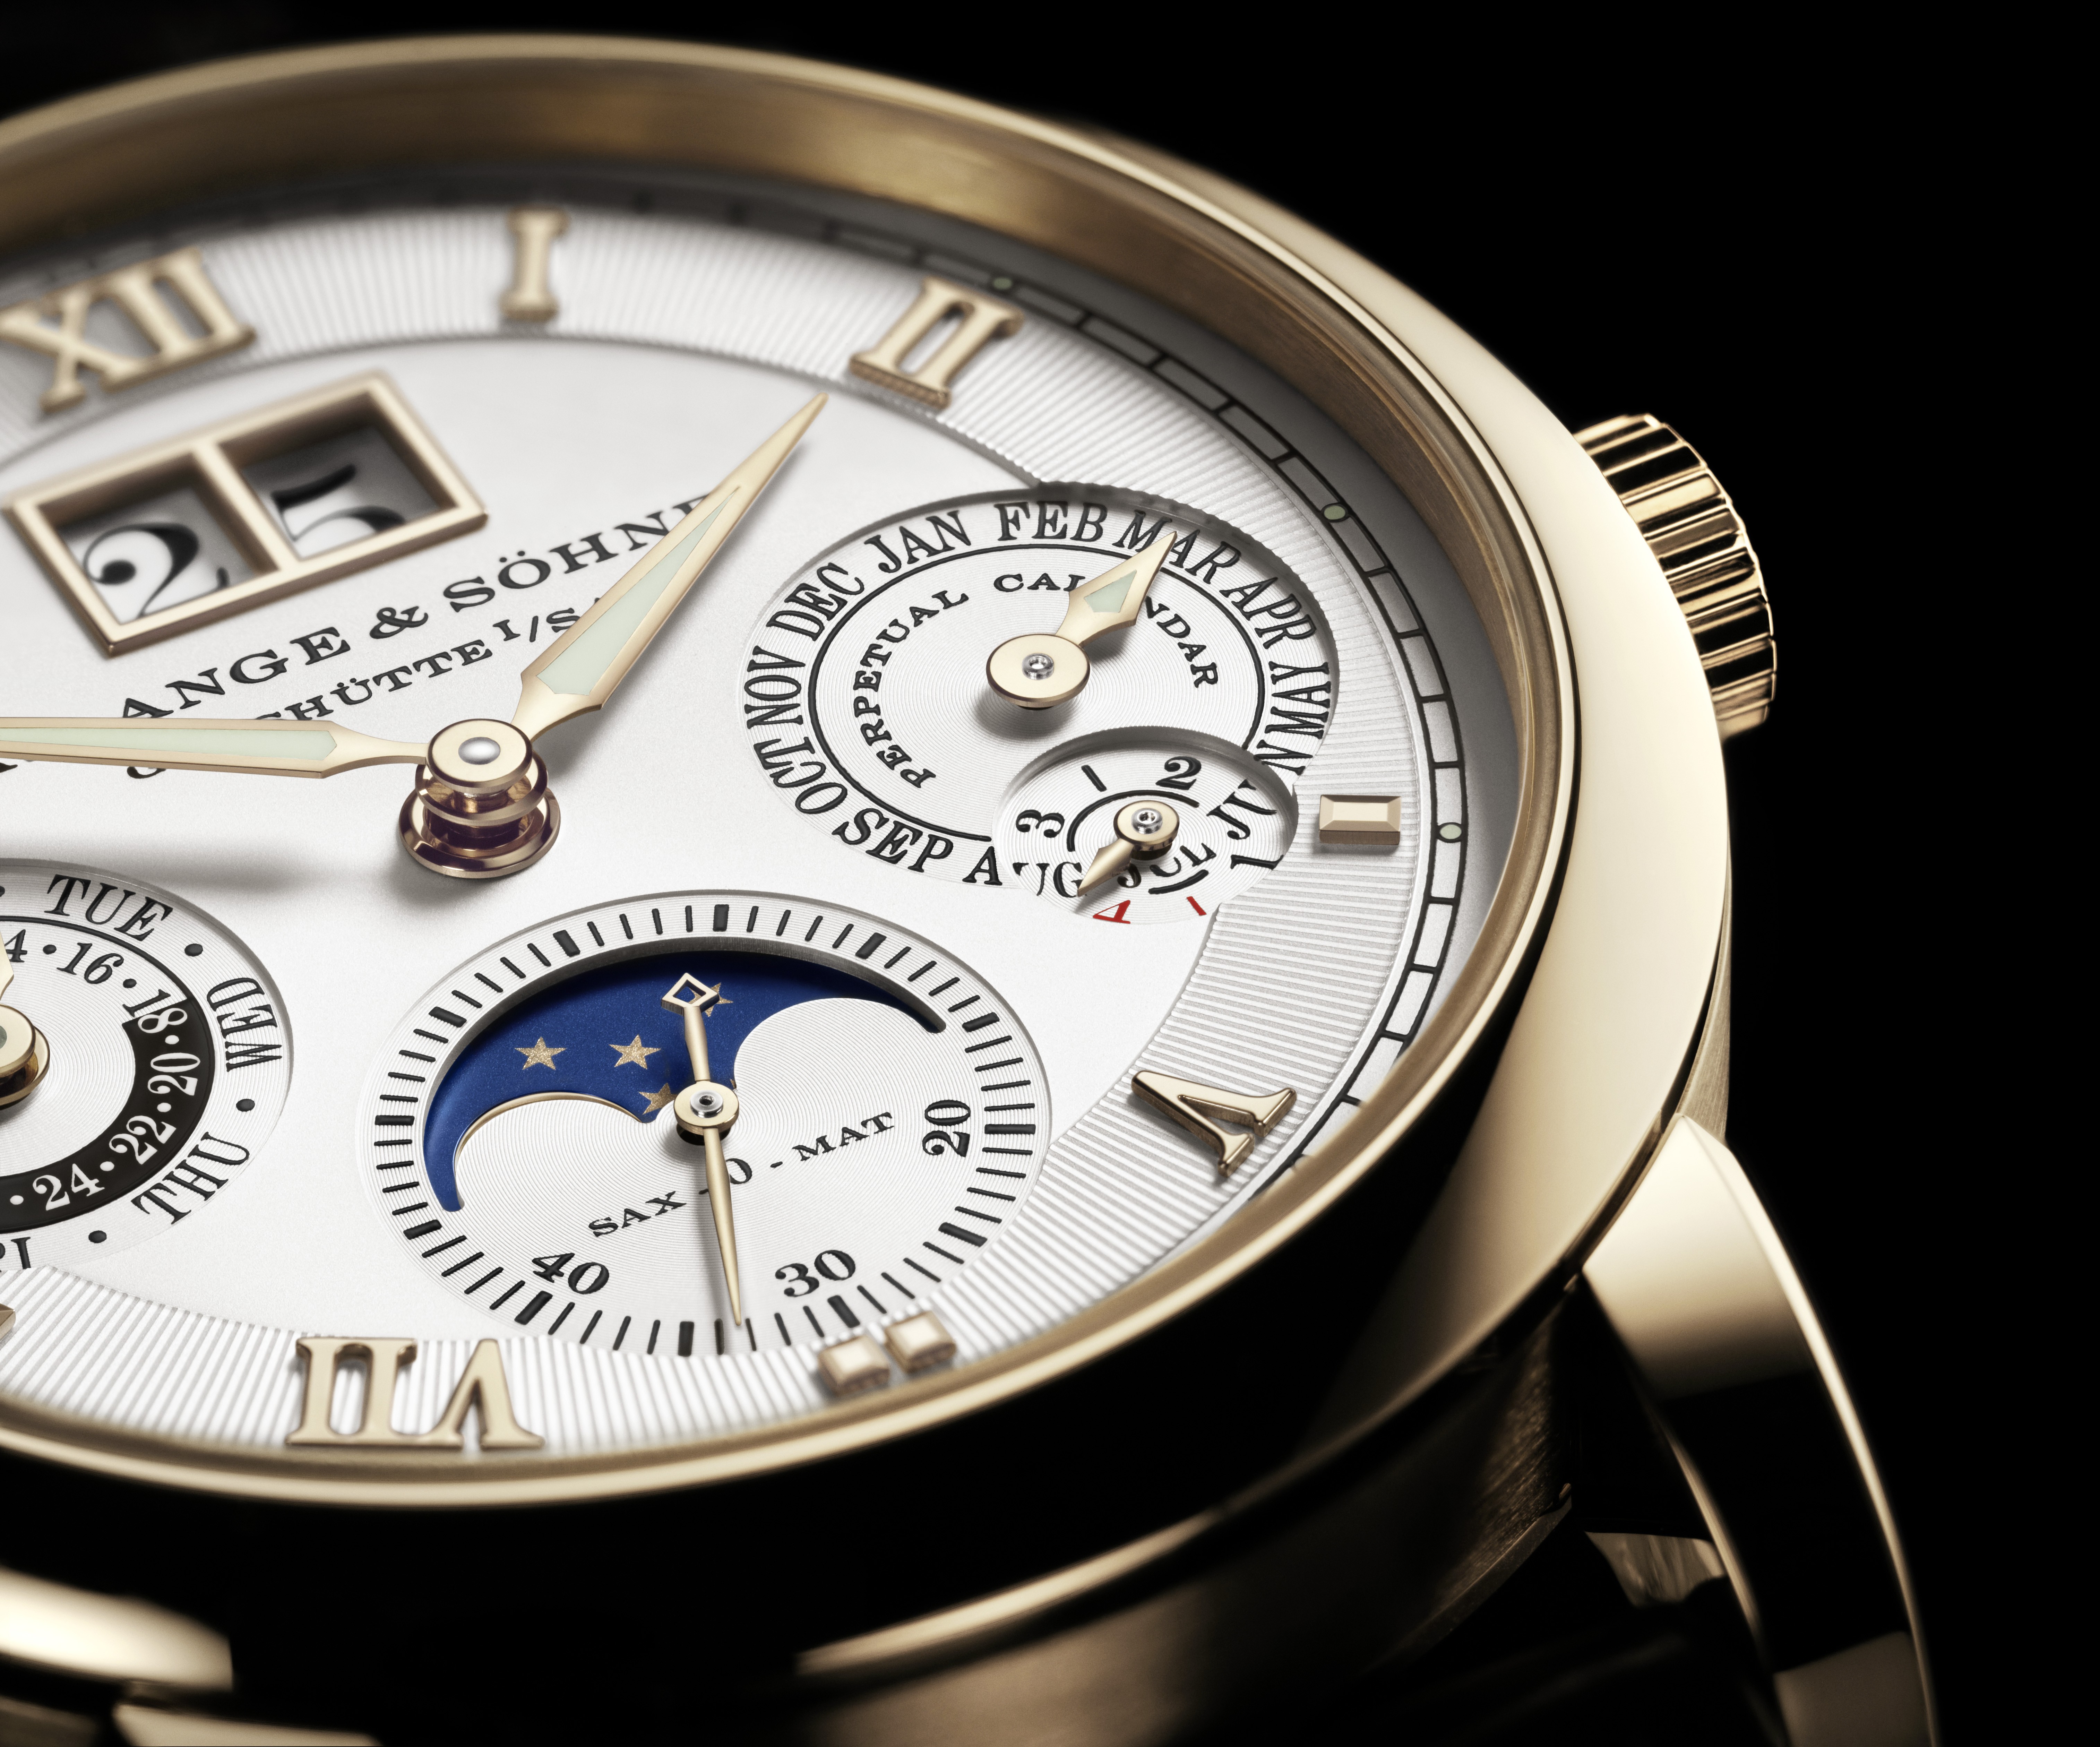 The beautiful dial details of A. Lange & Söhne's Langematic Perpetual Honeygold